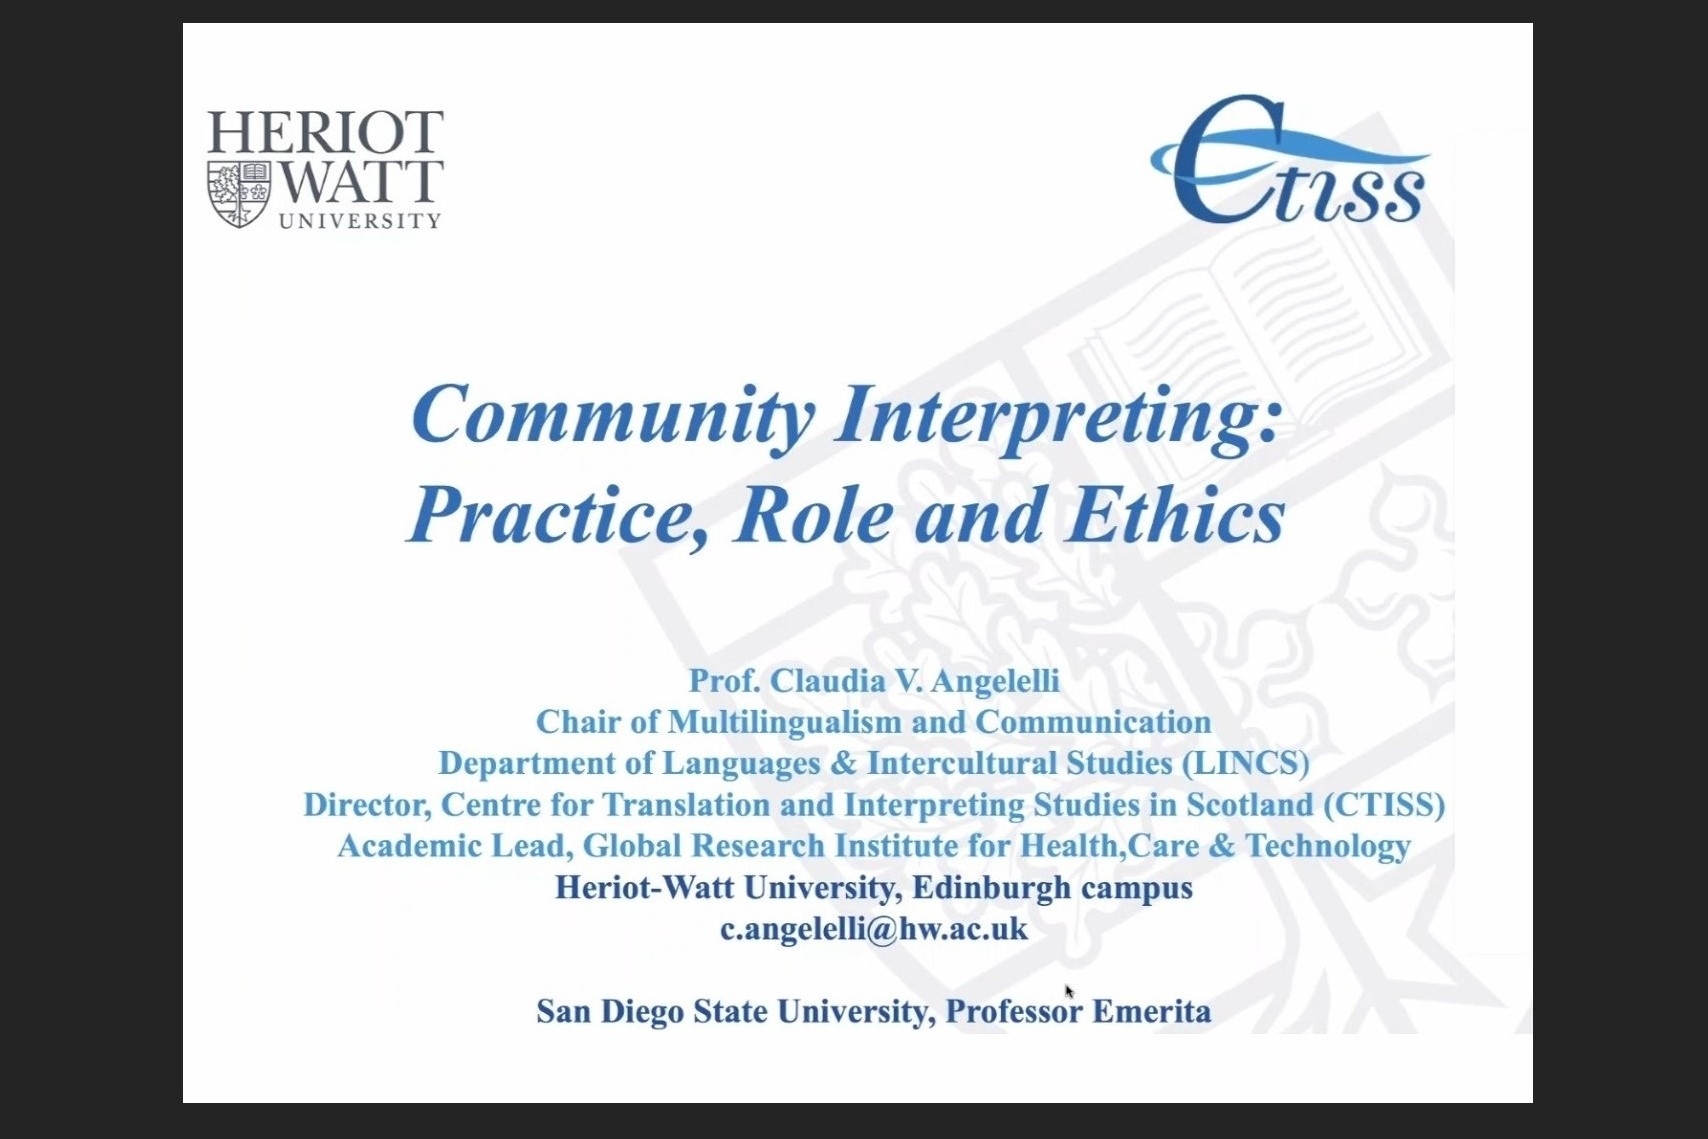  IUE Department of English Translation and Interpreting hosted Prof. Dr. Claudia V. Angelelli in the webinar titled "Community Interpreting: Practice and Ethics".